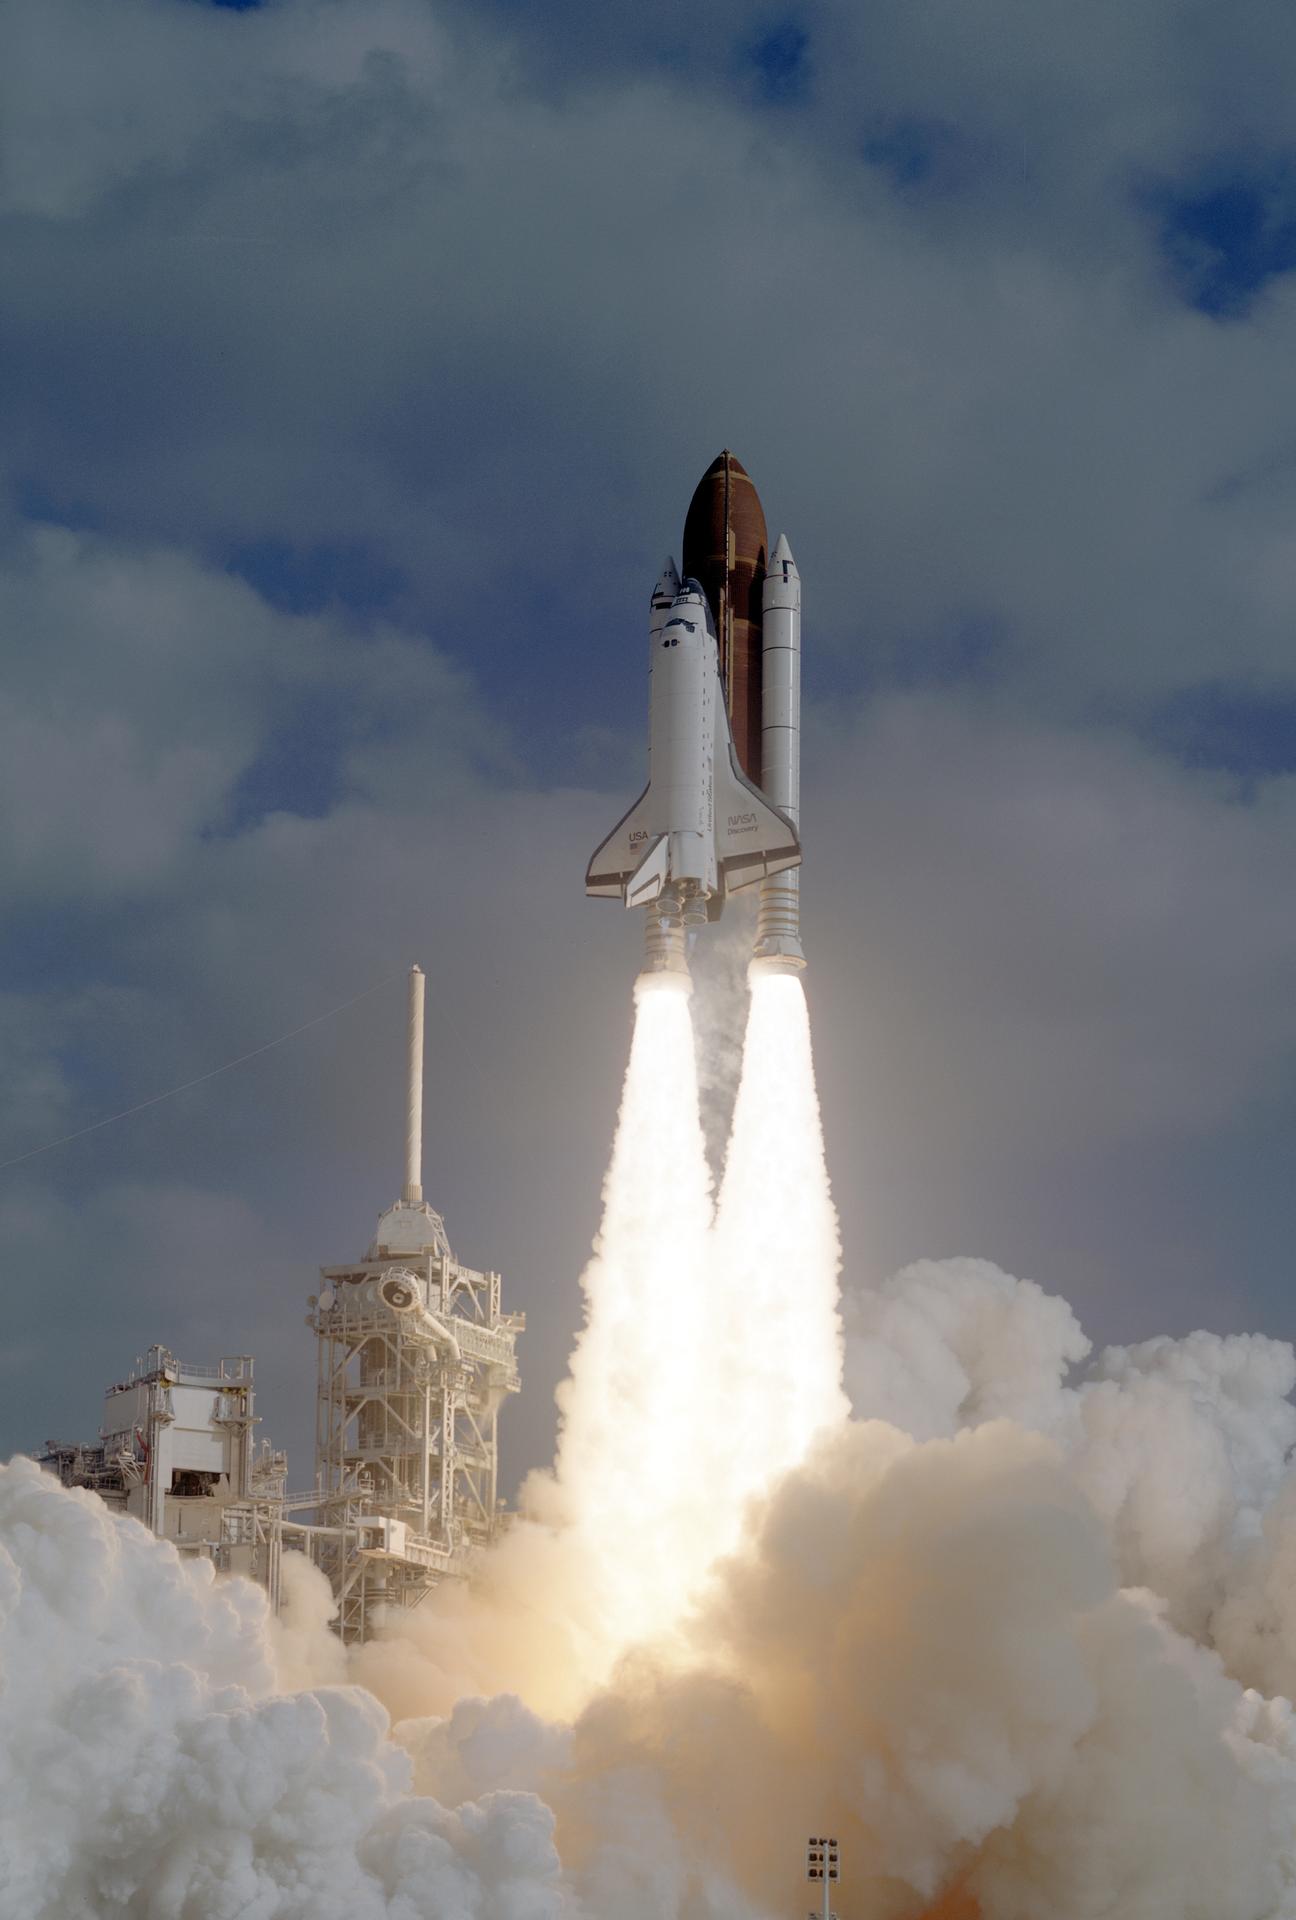 Space shuttle Discovery lifted off on April 24, 1990 at 8:33 a.m. EDT on the STS-31 mission, carrying the Hubble Space Telescope